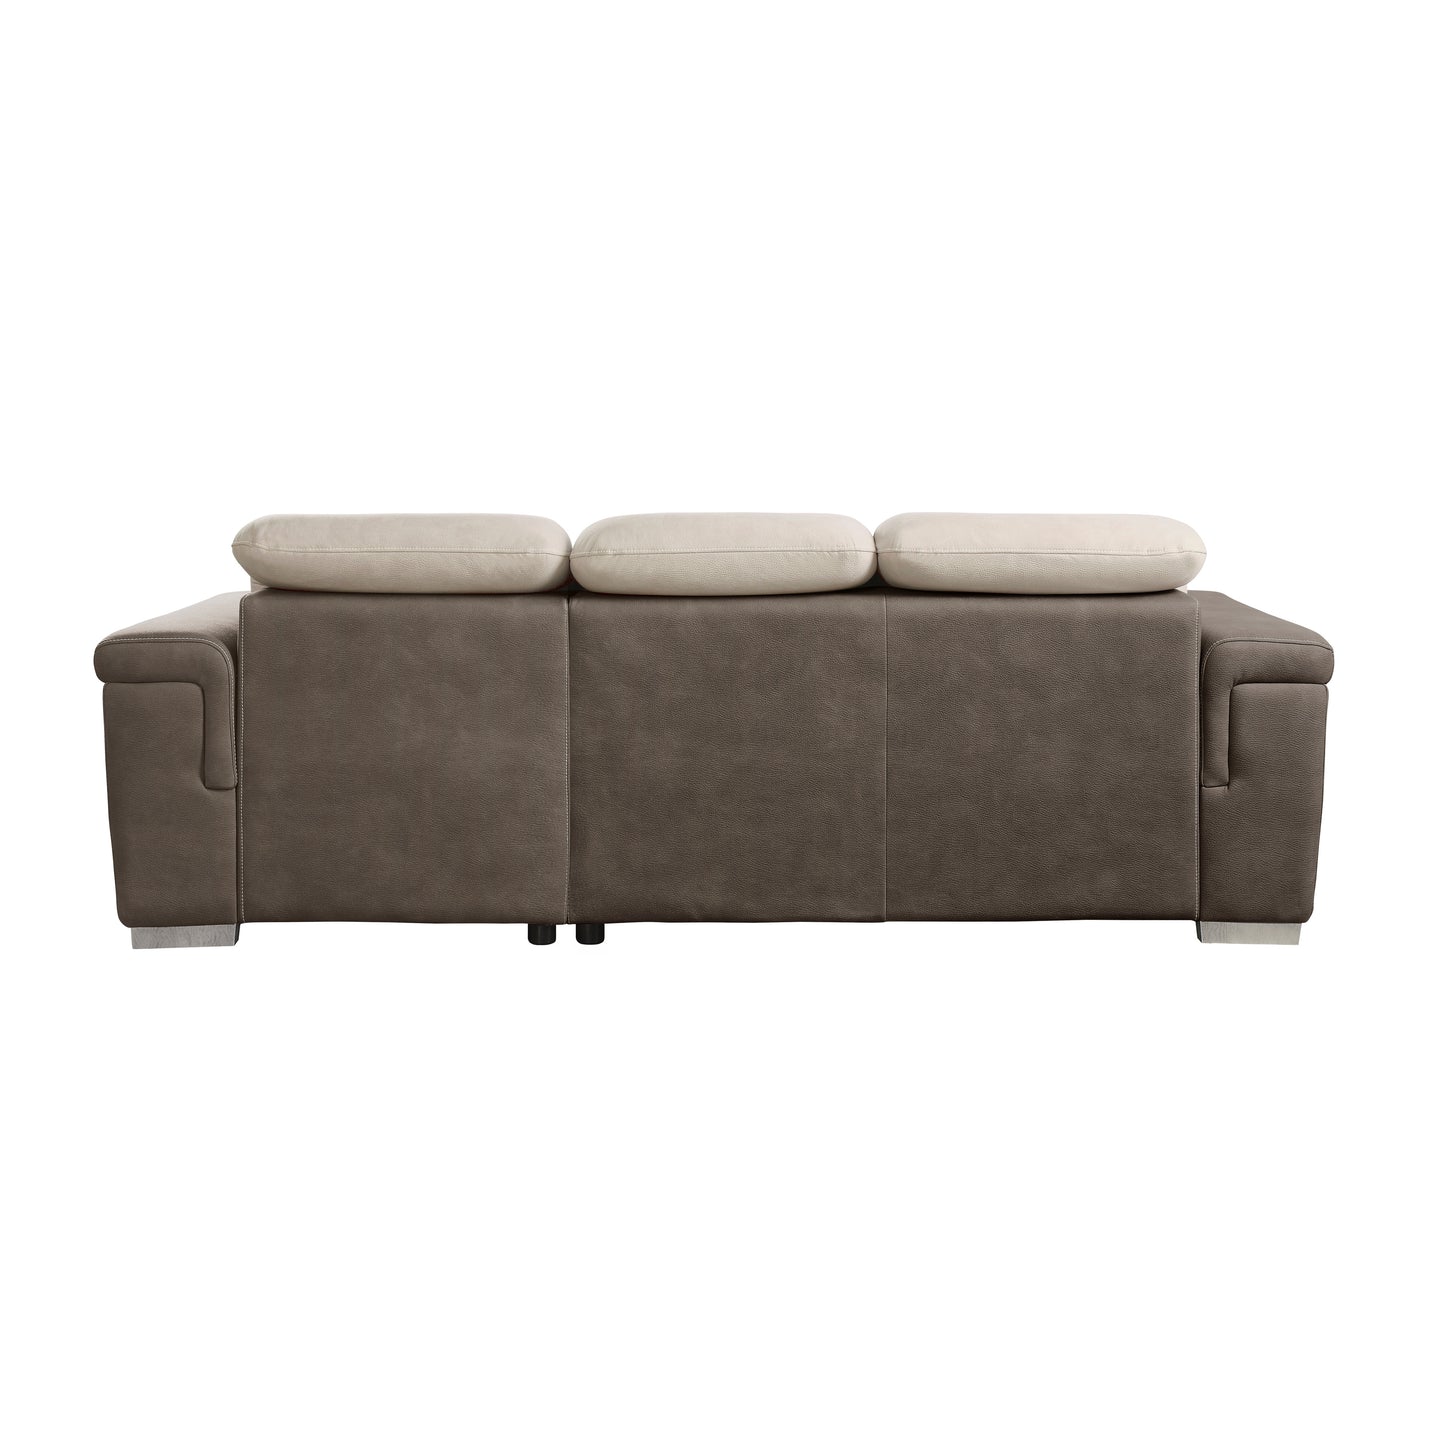 Alfio 2-Pcs Sectional w/ Adj. Headrests, Pull-out Bed & Right Chaise w/ Hidden Storage 2 TONE